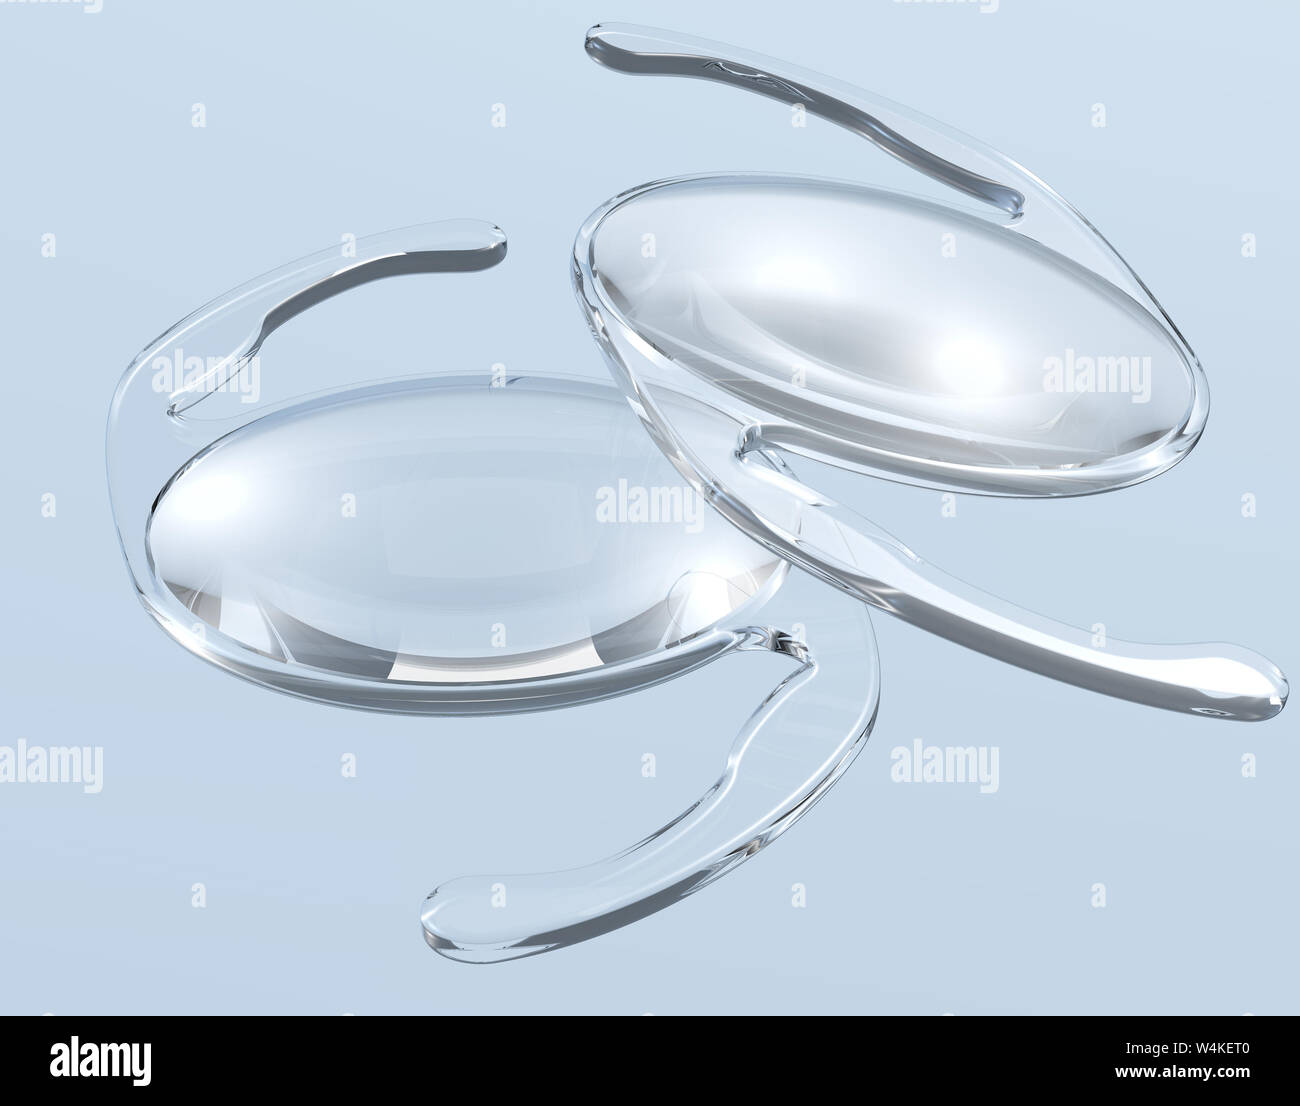 Medically illustration showing intraocular lens (IOL), a lens implanted in the eye as part of a treatment for cataracts or myopia, 3D illustration Stock Photo